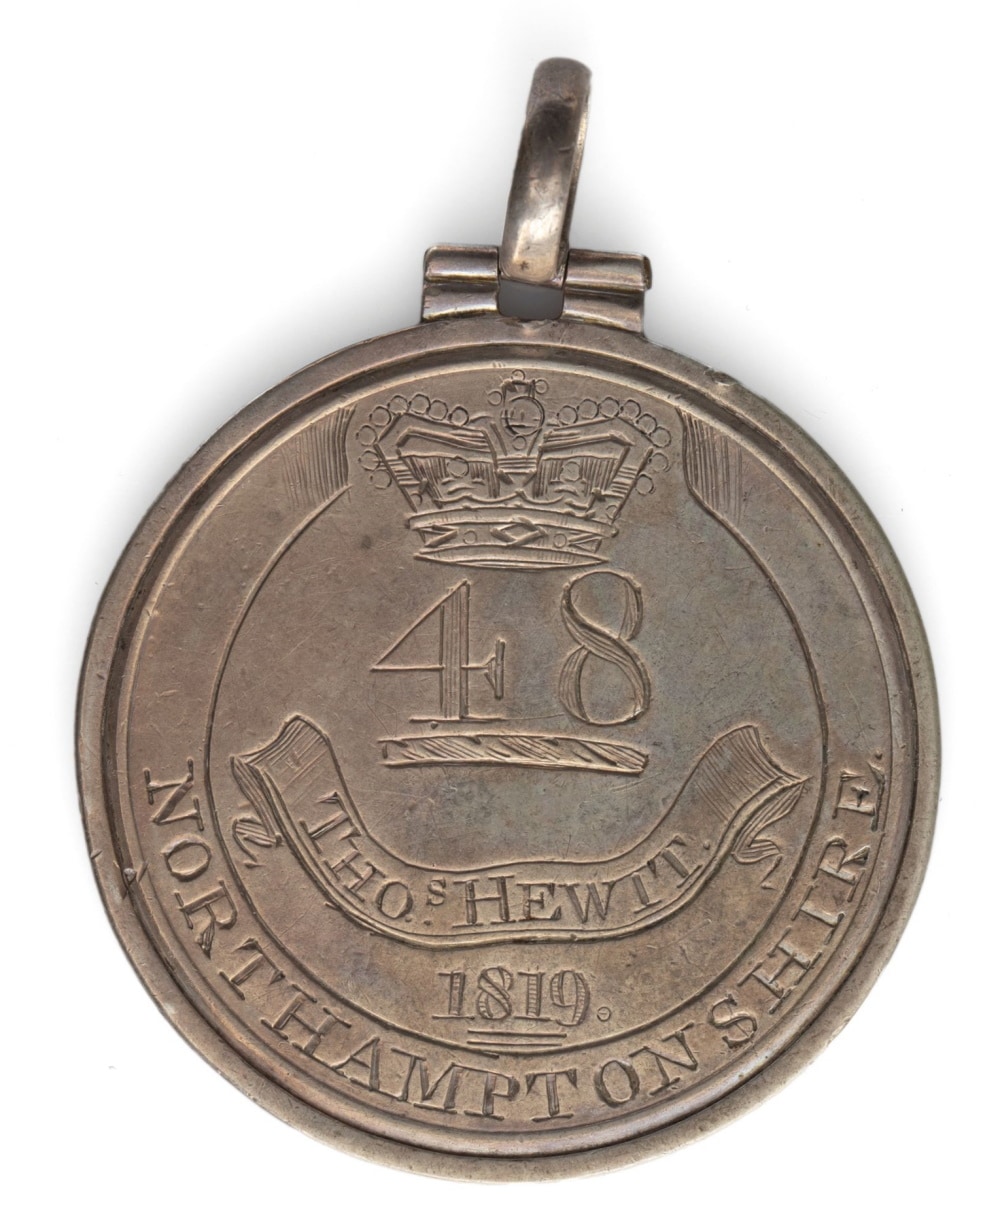 Regimental medal of the 48th (Northamptonshire) Foot, awarded to Thomas Hewit [sic], Sydney, 1819; Museum of Applied Arts and Sciences, Sydney